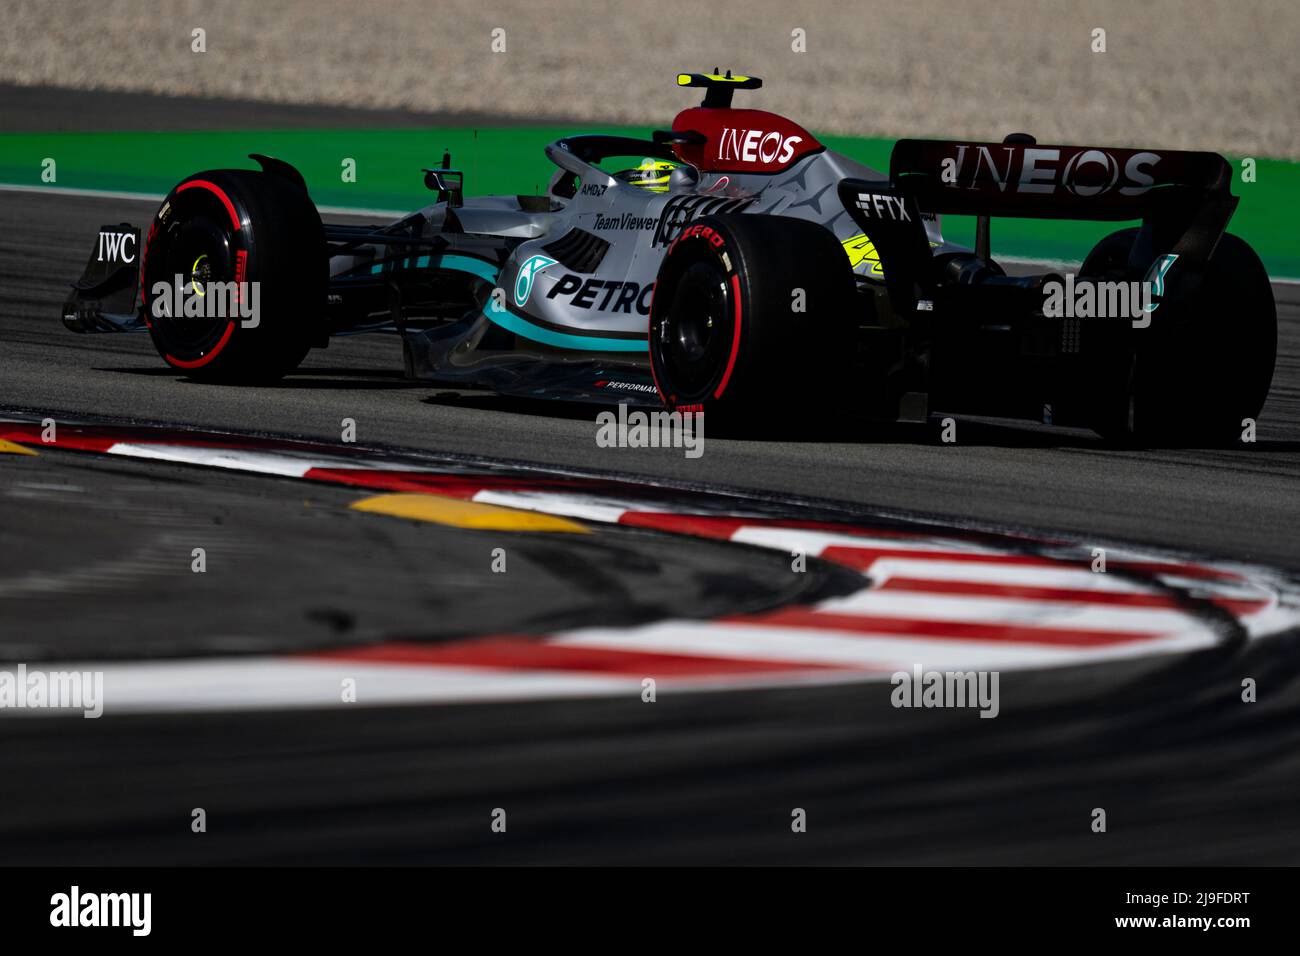 Barcelona, Spain. 21st May, 2022. Lewis Hamilton of Great Britain and Mercedes drives his W13 during qualifying ahead of the F1 Grand Prix of Spain at Circuit de Barcelona-Catalunya on May 21, 2022 in Barcelona, Spain. Foto: Siu Wu. Credit: dpa/Alamy Live News Stock Photo